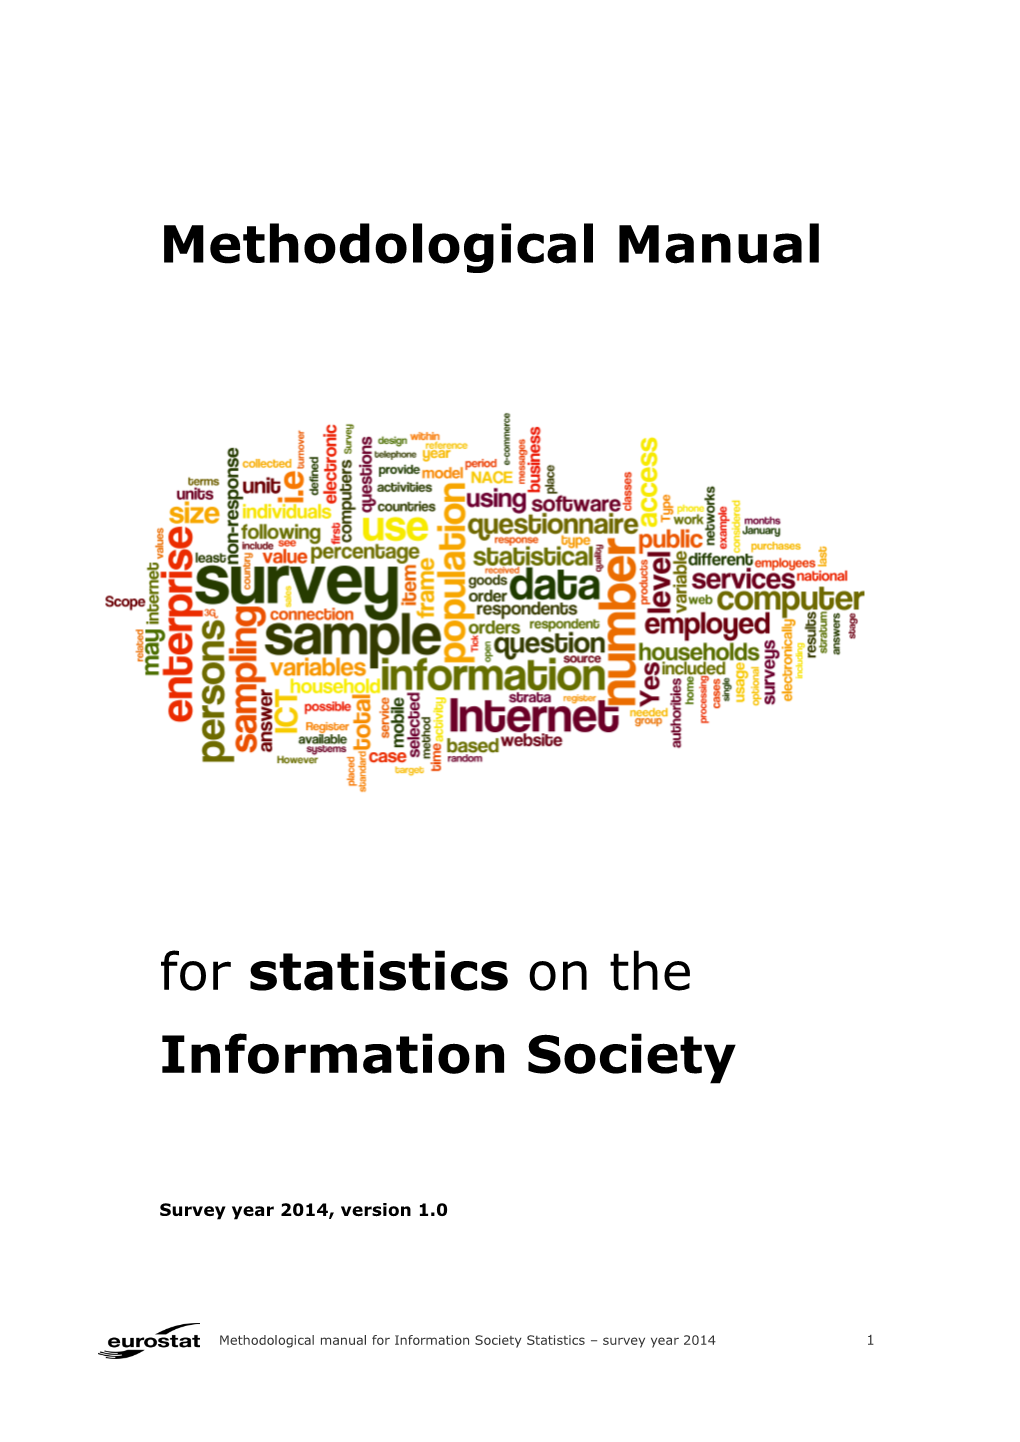 Methodological Manual for Statistics on the Information Society